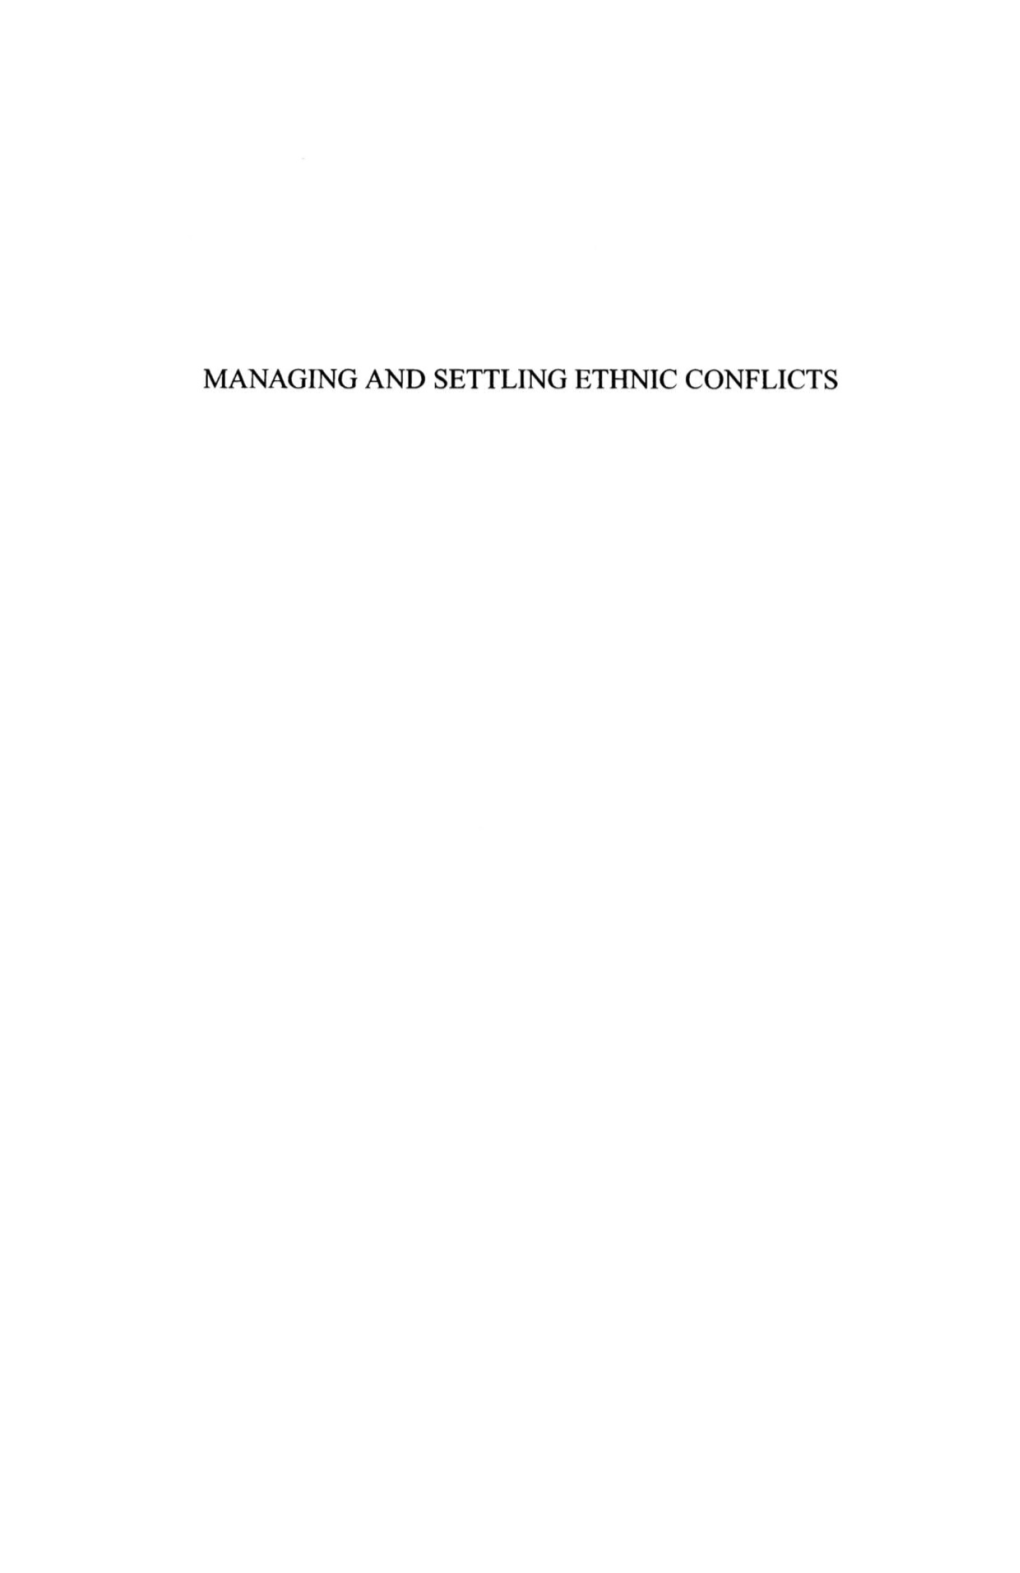 MANAGING and SETTLING ETHNIC CONFLICTS UL~CHSCHNECKENER STEFAN WOLFF Editors